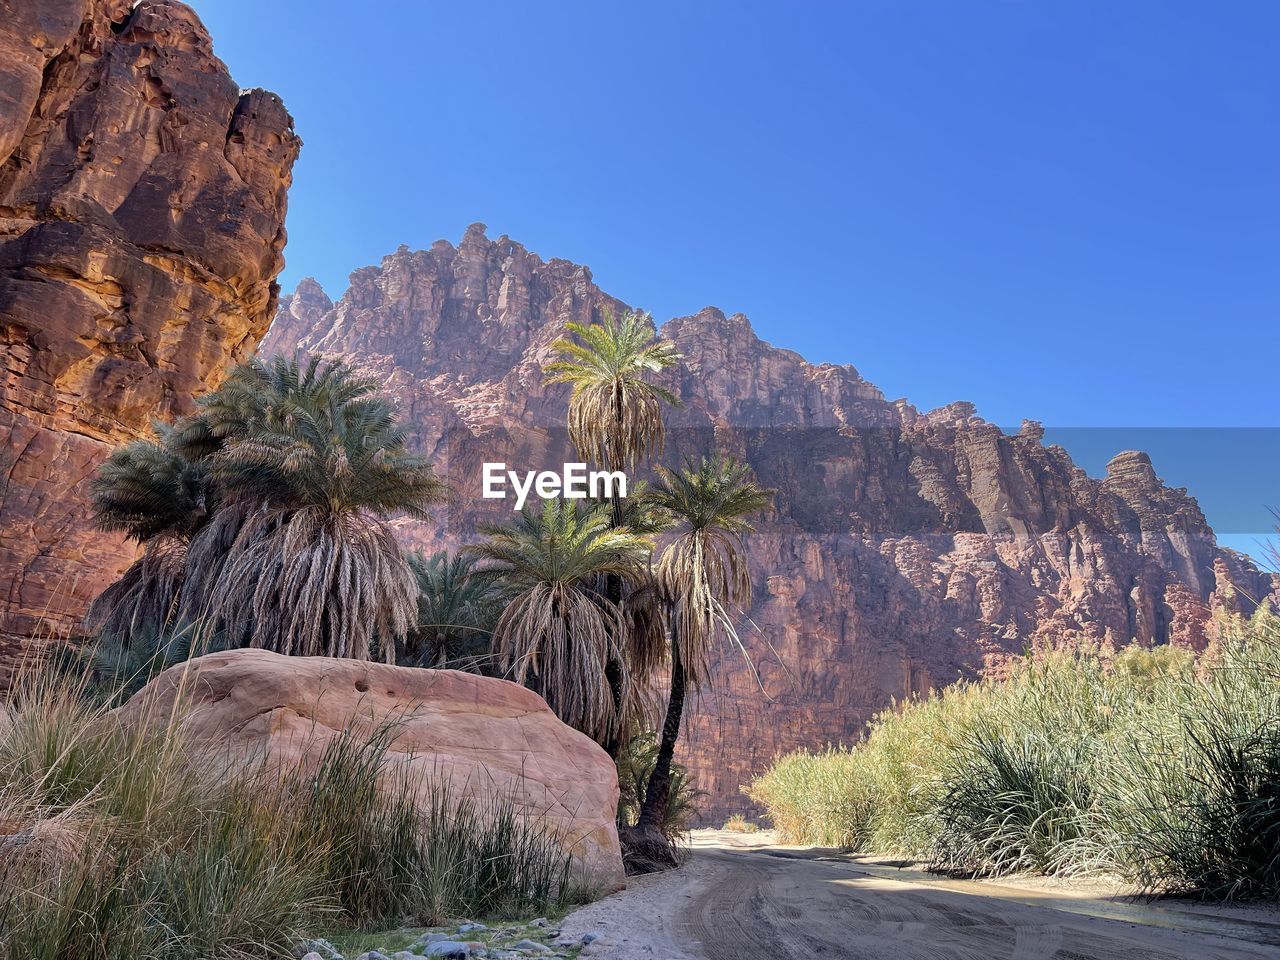 rock, nature, plant, scenics - nature, landscape, sky, environment, mountain, tree, land, beauty in nature, rock formation, travel destinations, clear sky, travel, valley, desert, wilderness, no people, blue, wadi, canyon, non-urban scene, outdoors, sunny, mountain range, tranquility, semi-arid, road, palm tree, park, day, geology, tourism, tranquil scene, natural environment, arid climate, sunlight, cliff, national park, physical geography, climate